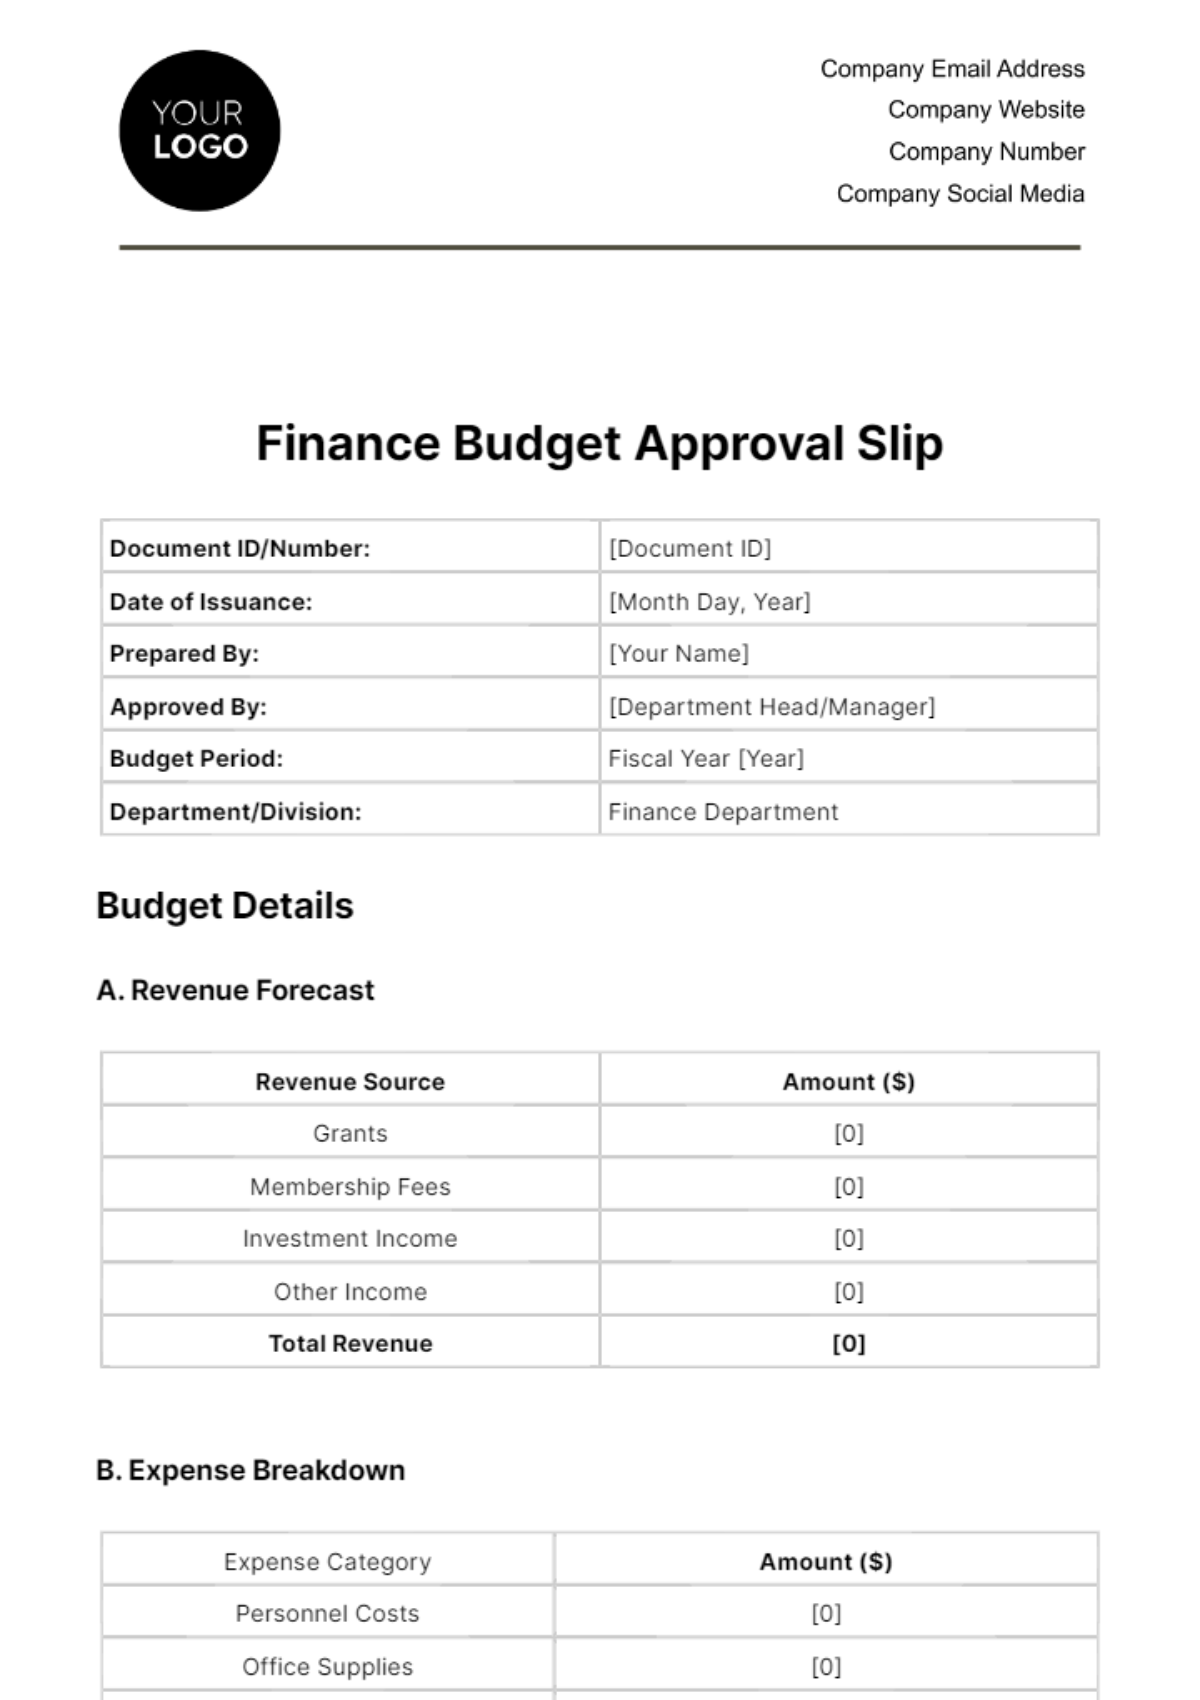 Free Finance Budget Approval Slip Template